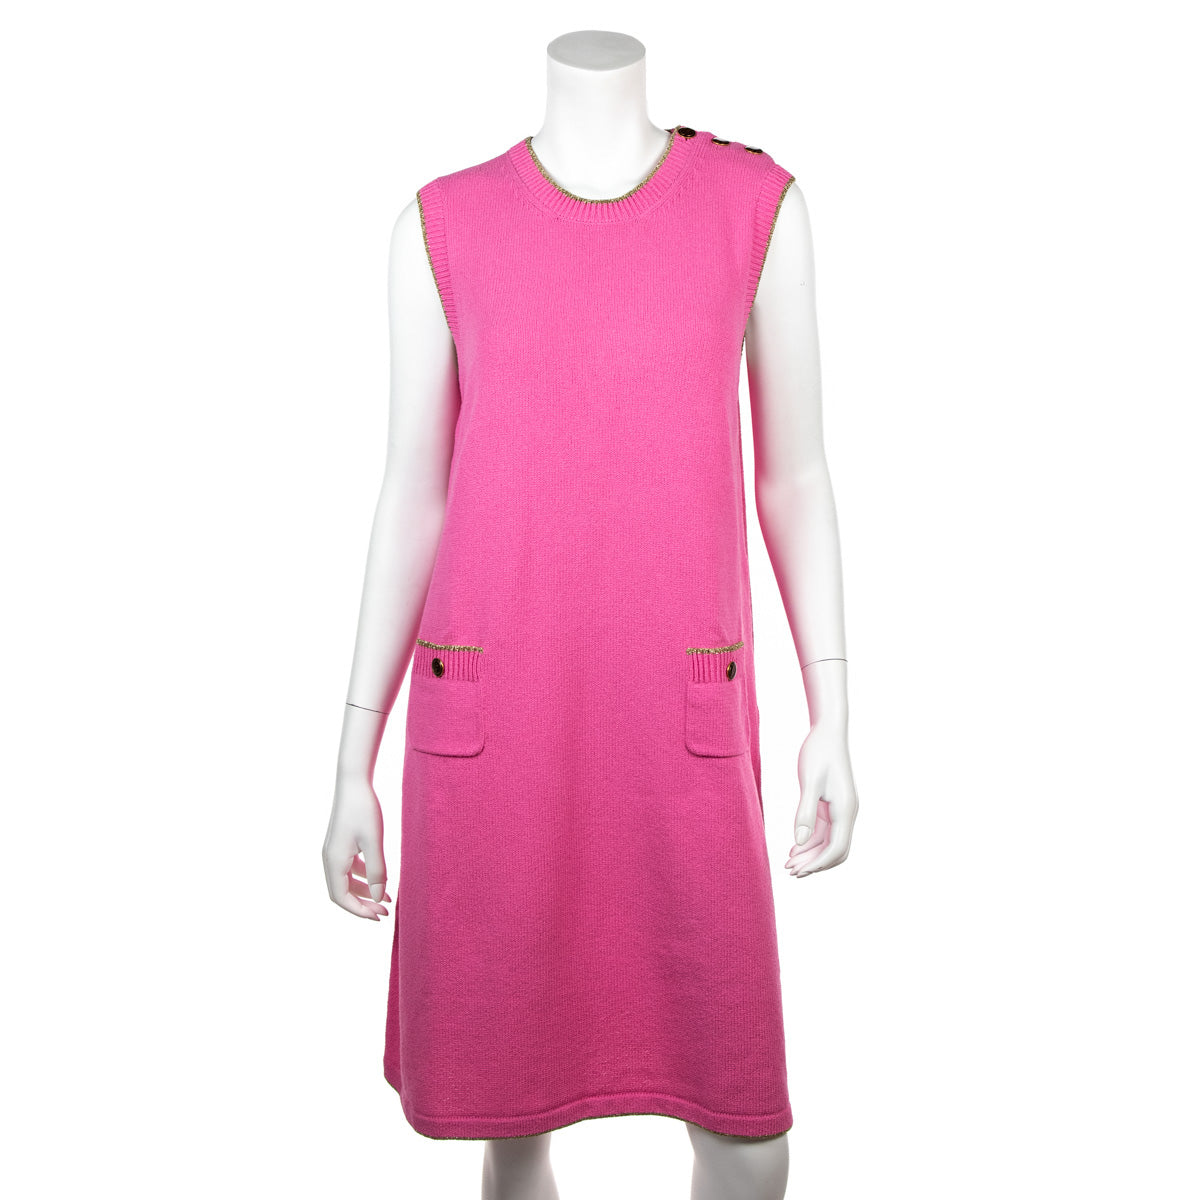 Gucci Pink Cotton Knit Sleeveless Dress Size XL - Love that Bag etc - Preowned Authentic Designer Handbags & Preloved Fashions